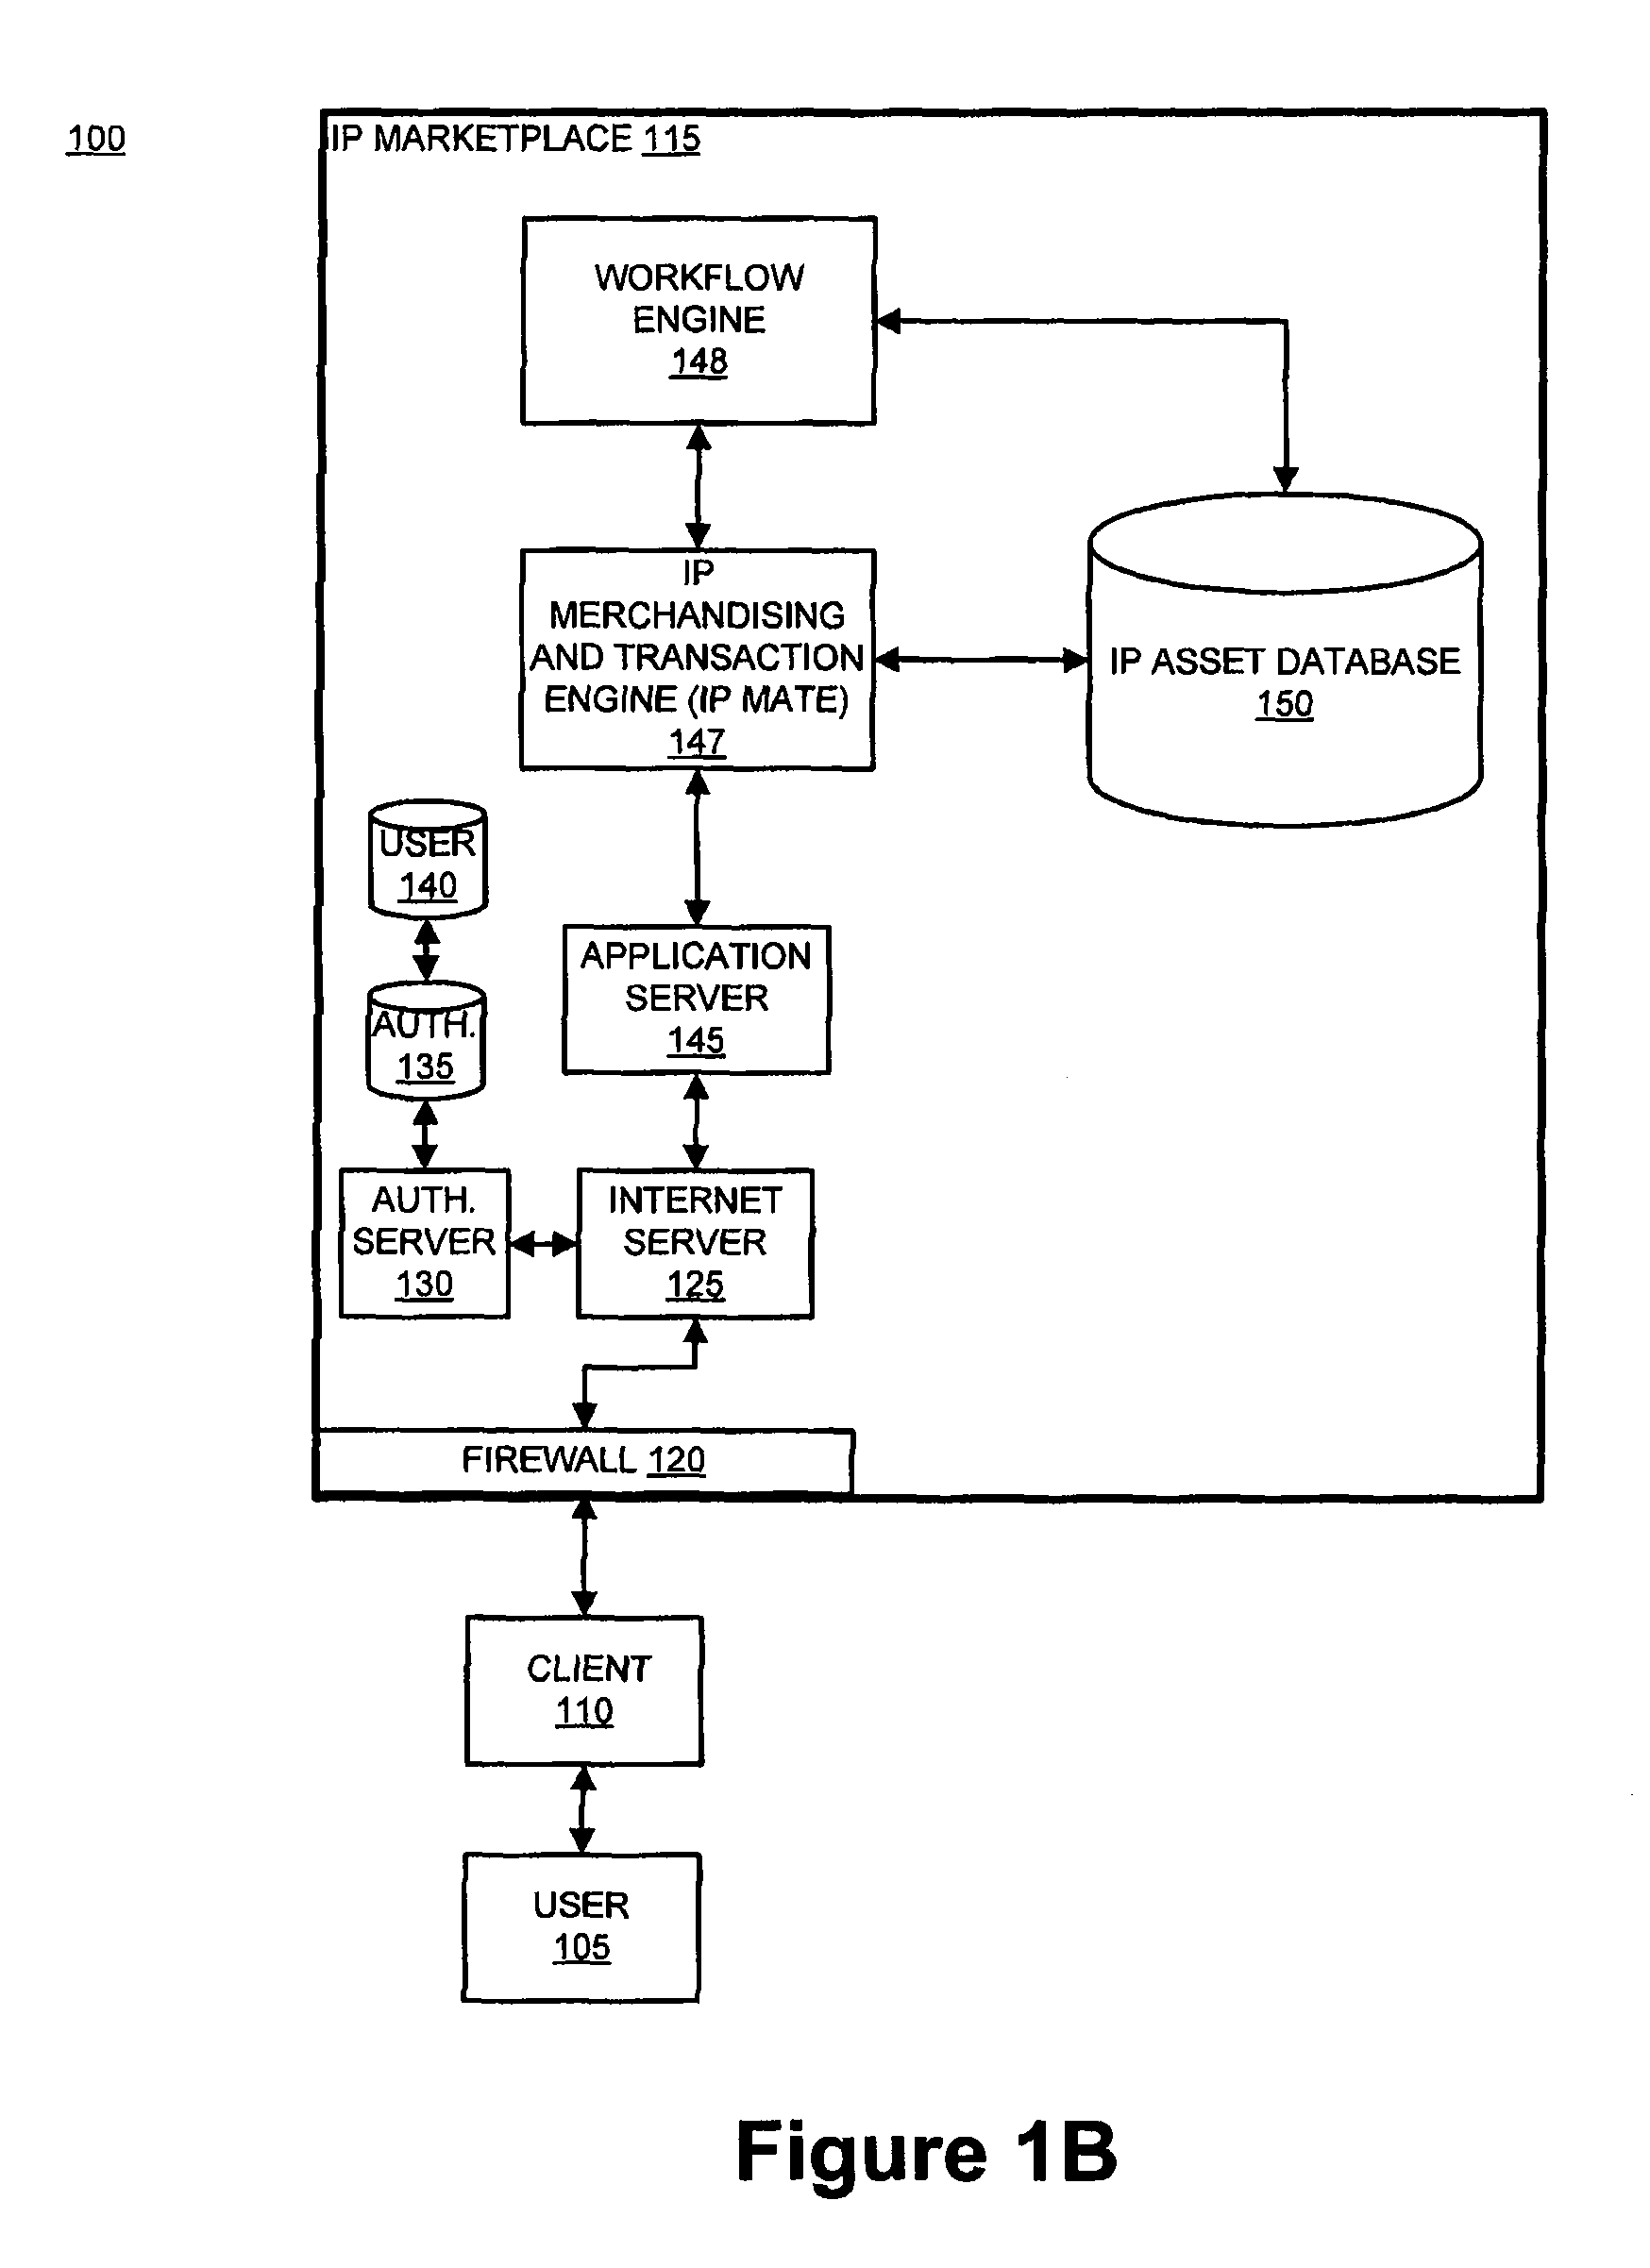 System and method for enabling channel promotions in an IP marketplace